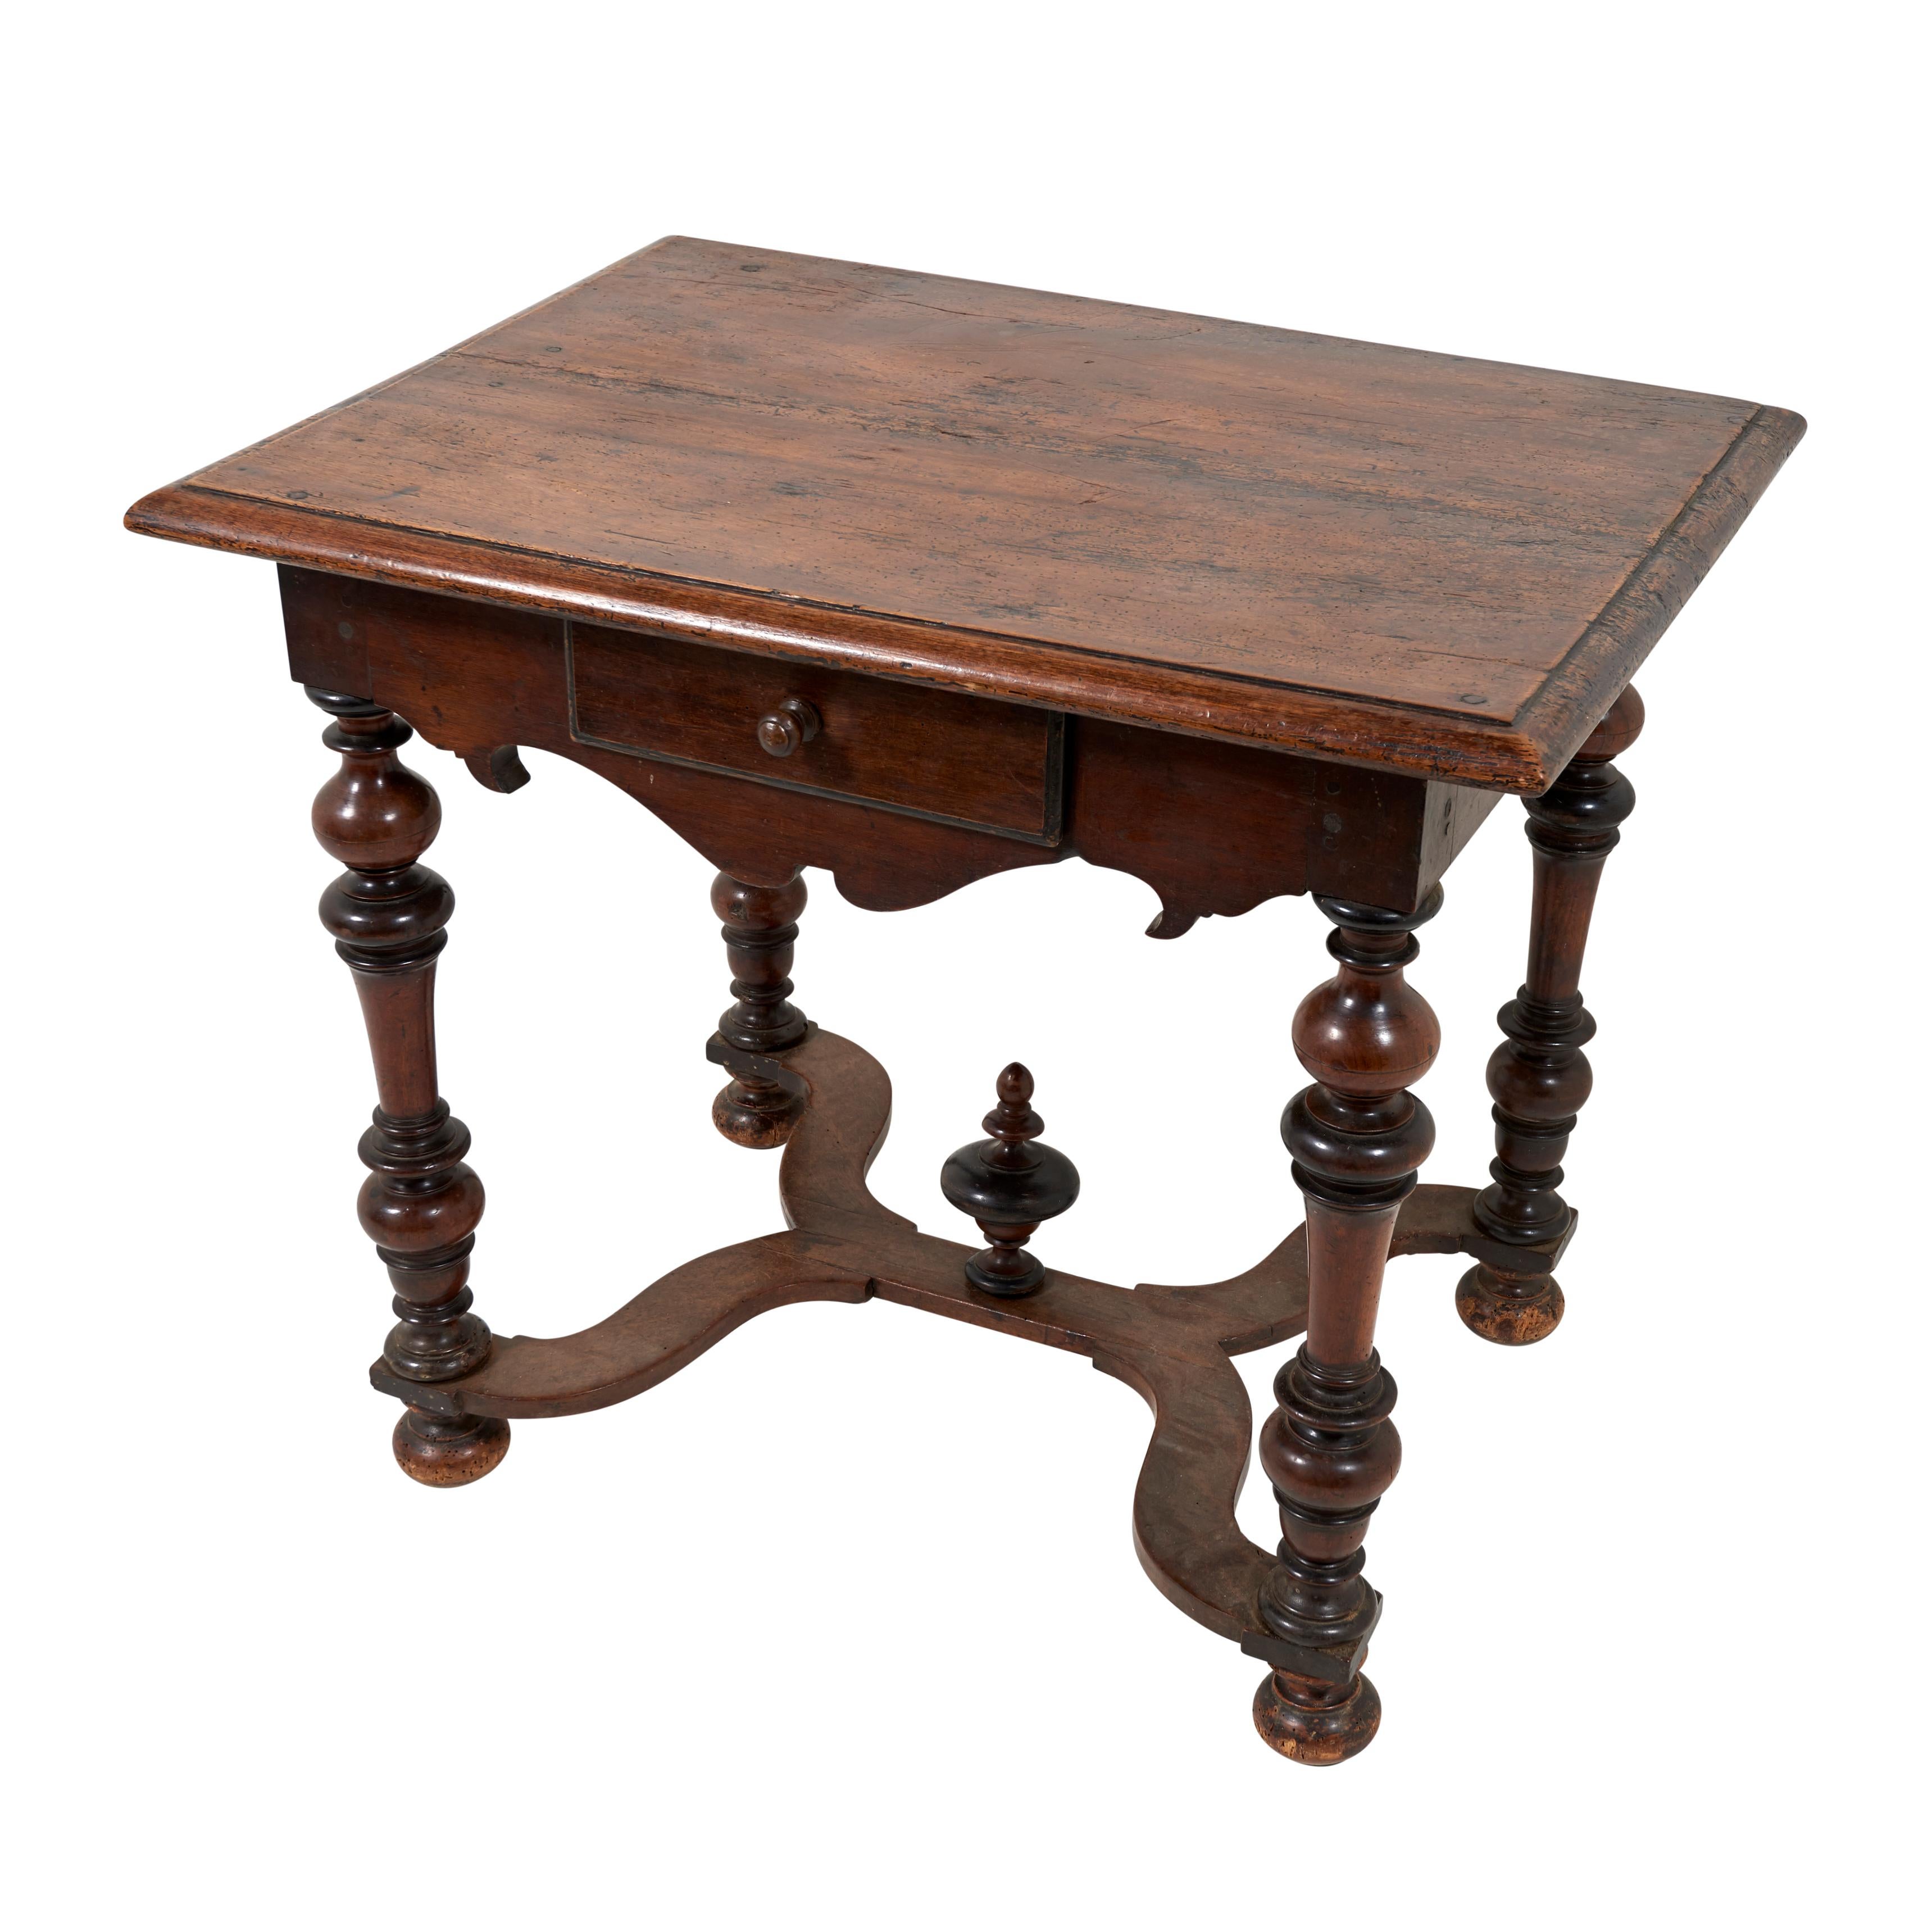 This 17th century French table includes a drawer that is lined in original fabric.

Since Schumacher was founded in 1889, our family-owned company has been synonymous with style, taste, and innovation. A passion for luxury and an unwavering